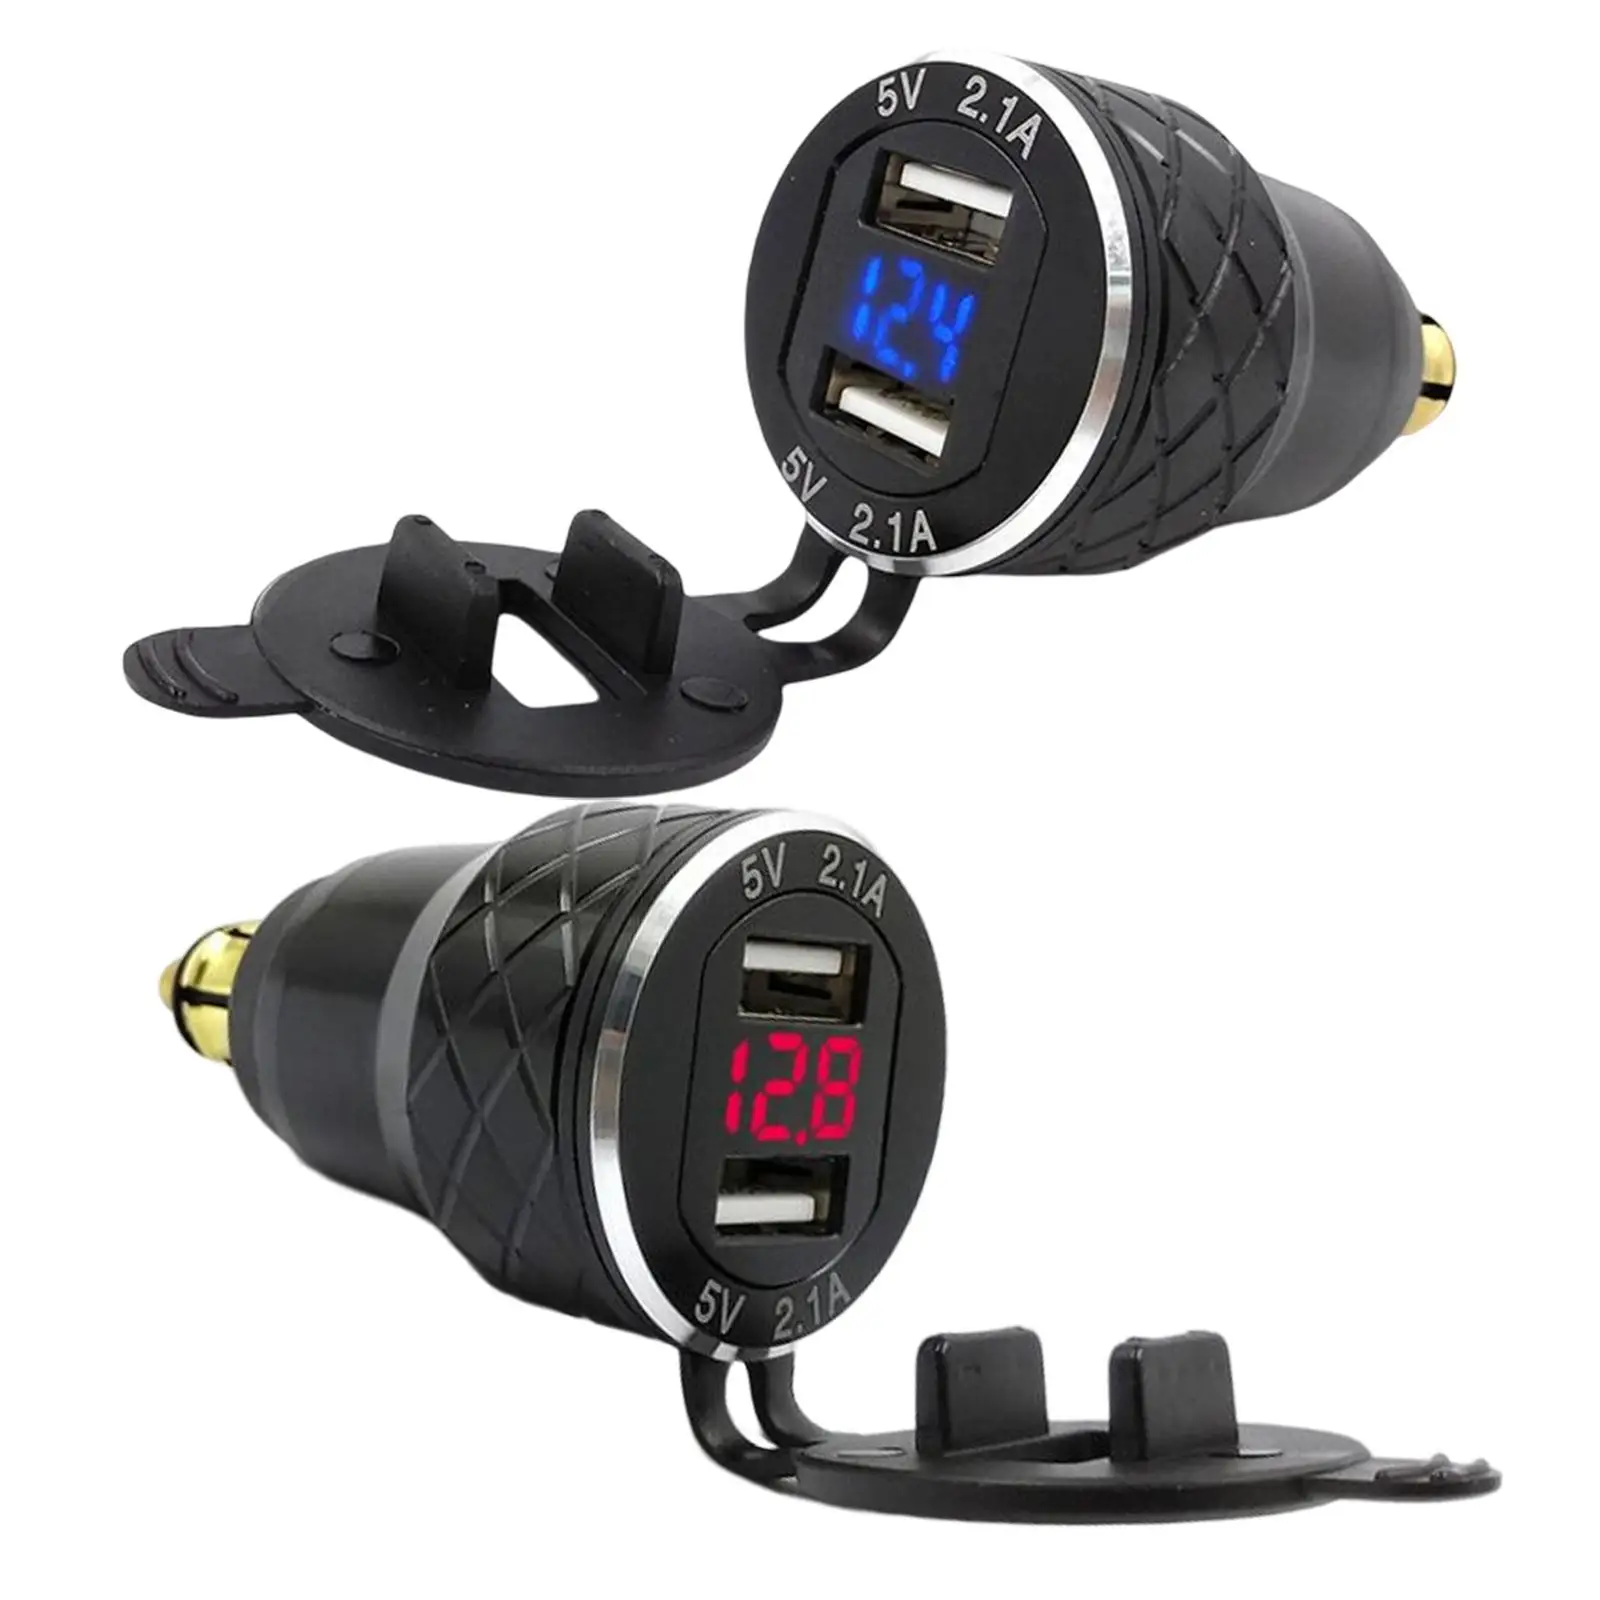 Dual USB Charger LED Display Fast Charge Voltmeter Charger Socket Fits for Mini 2 Port